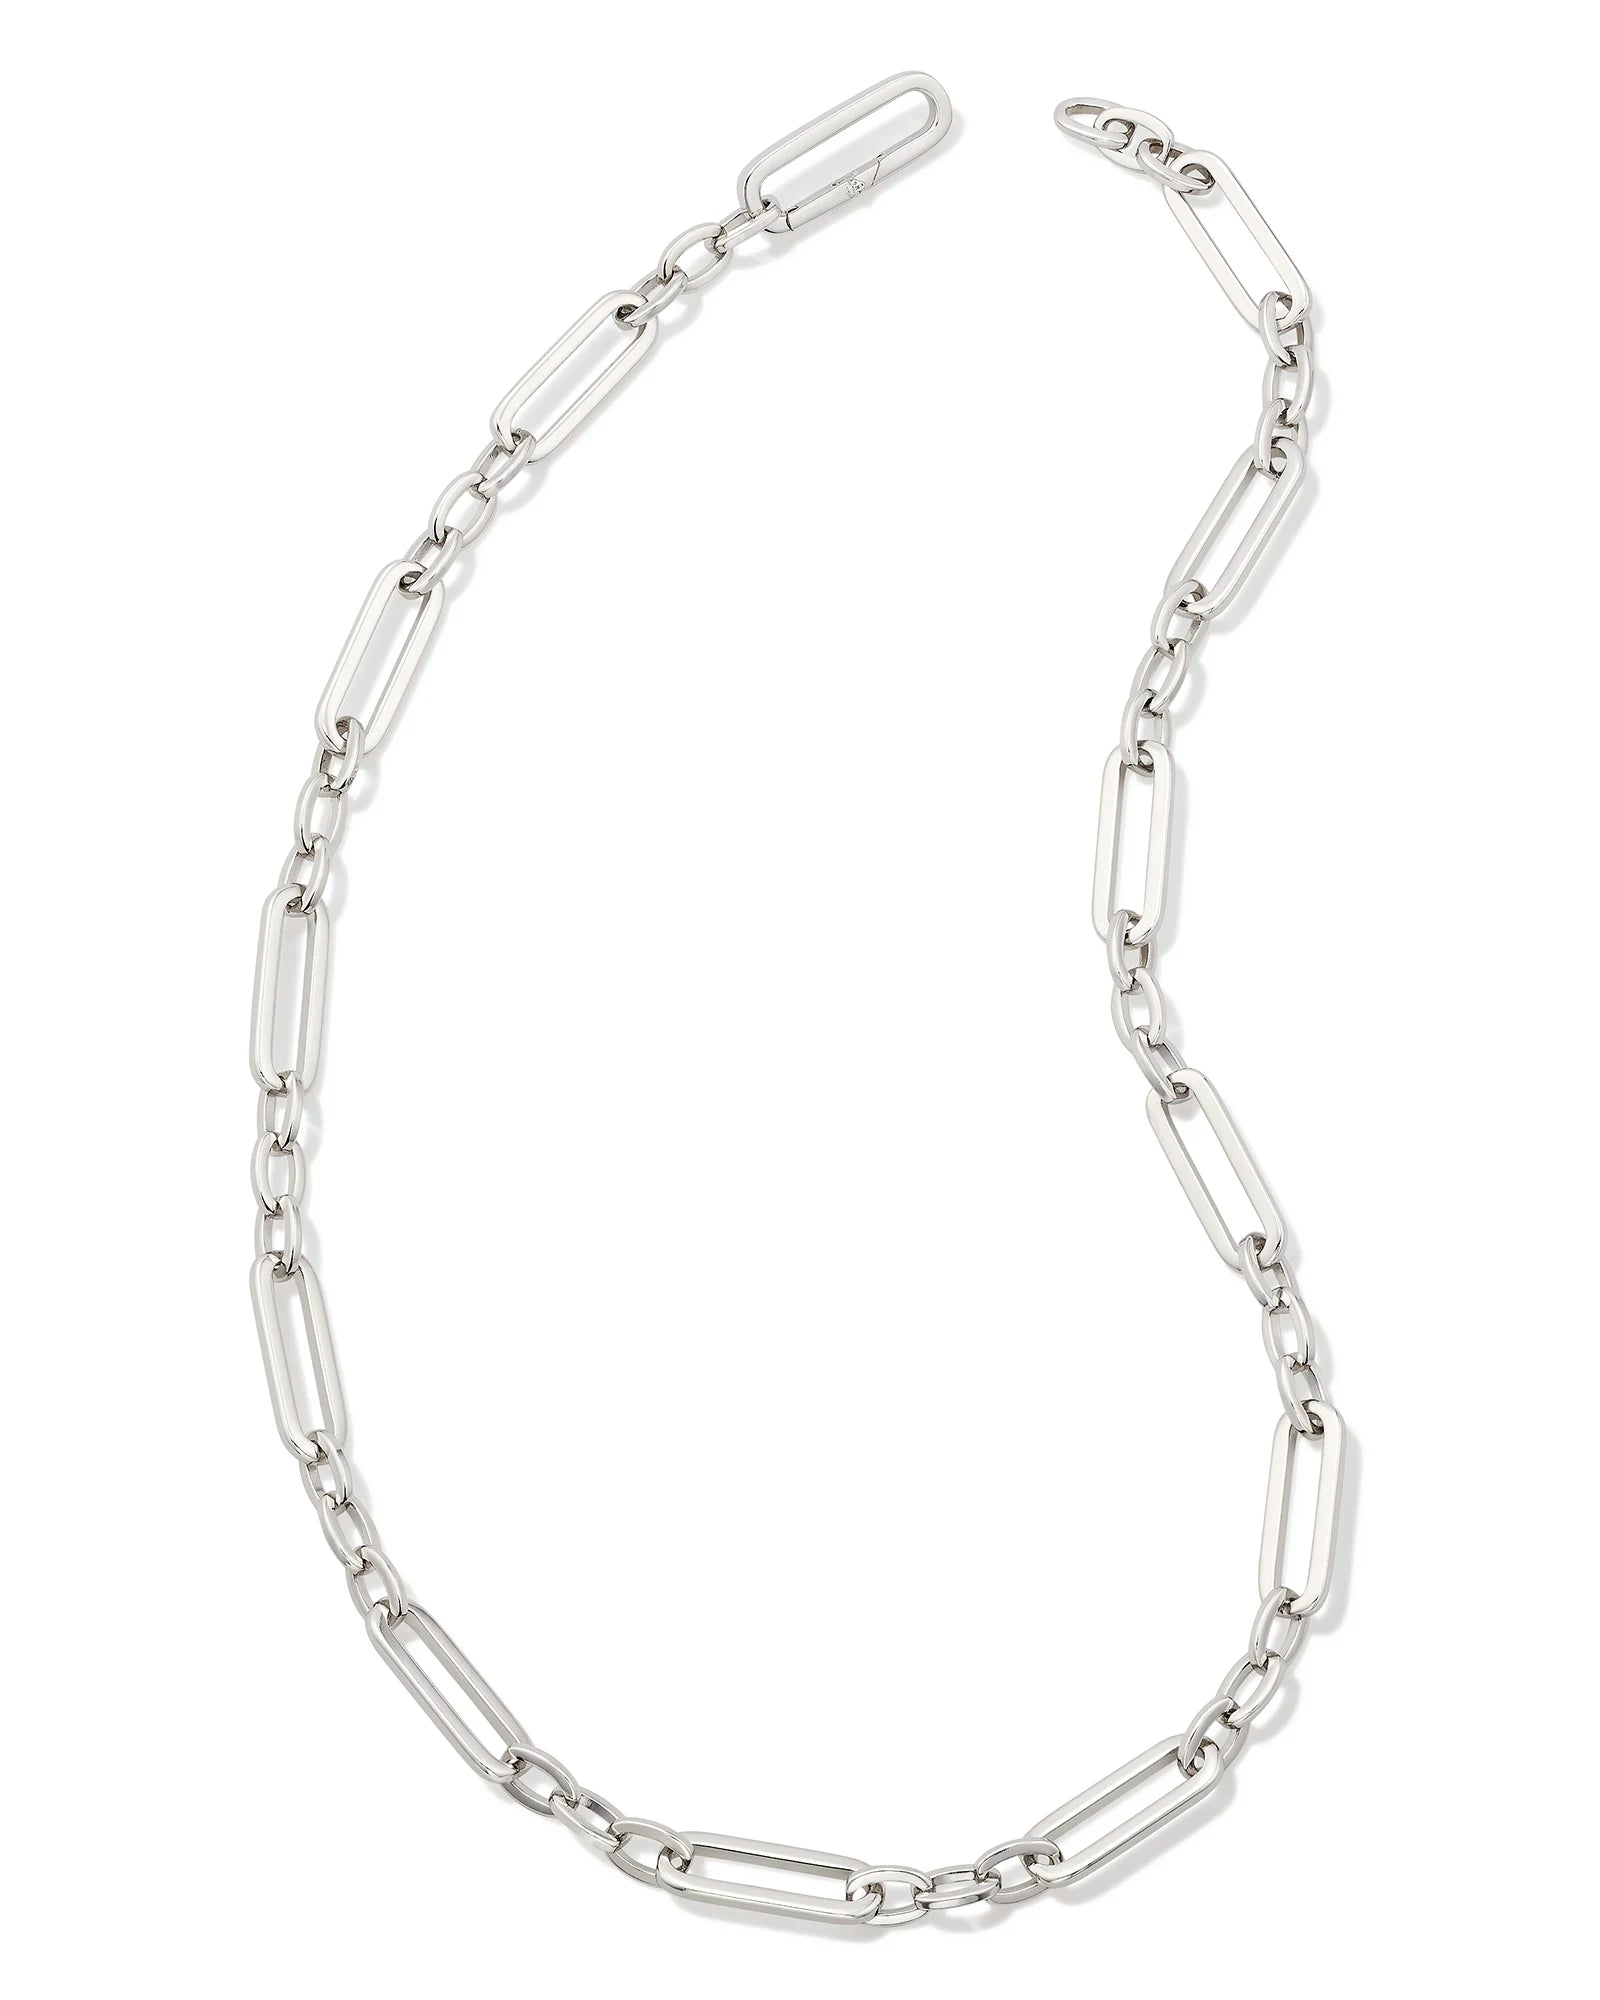 Kendra Scott | Heather Link and Chain Necklace in Silver - Giddy Up Glamour Boutique